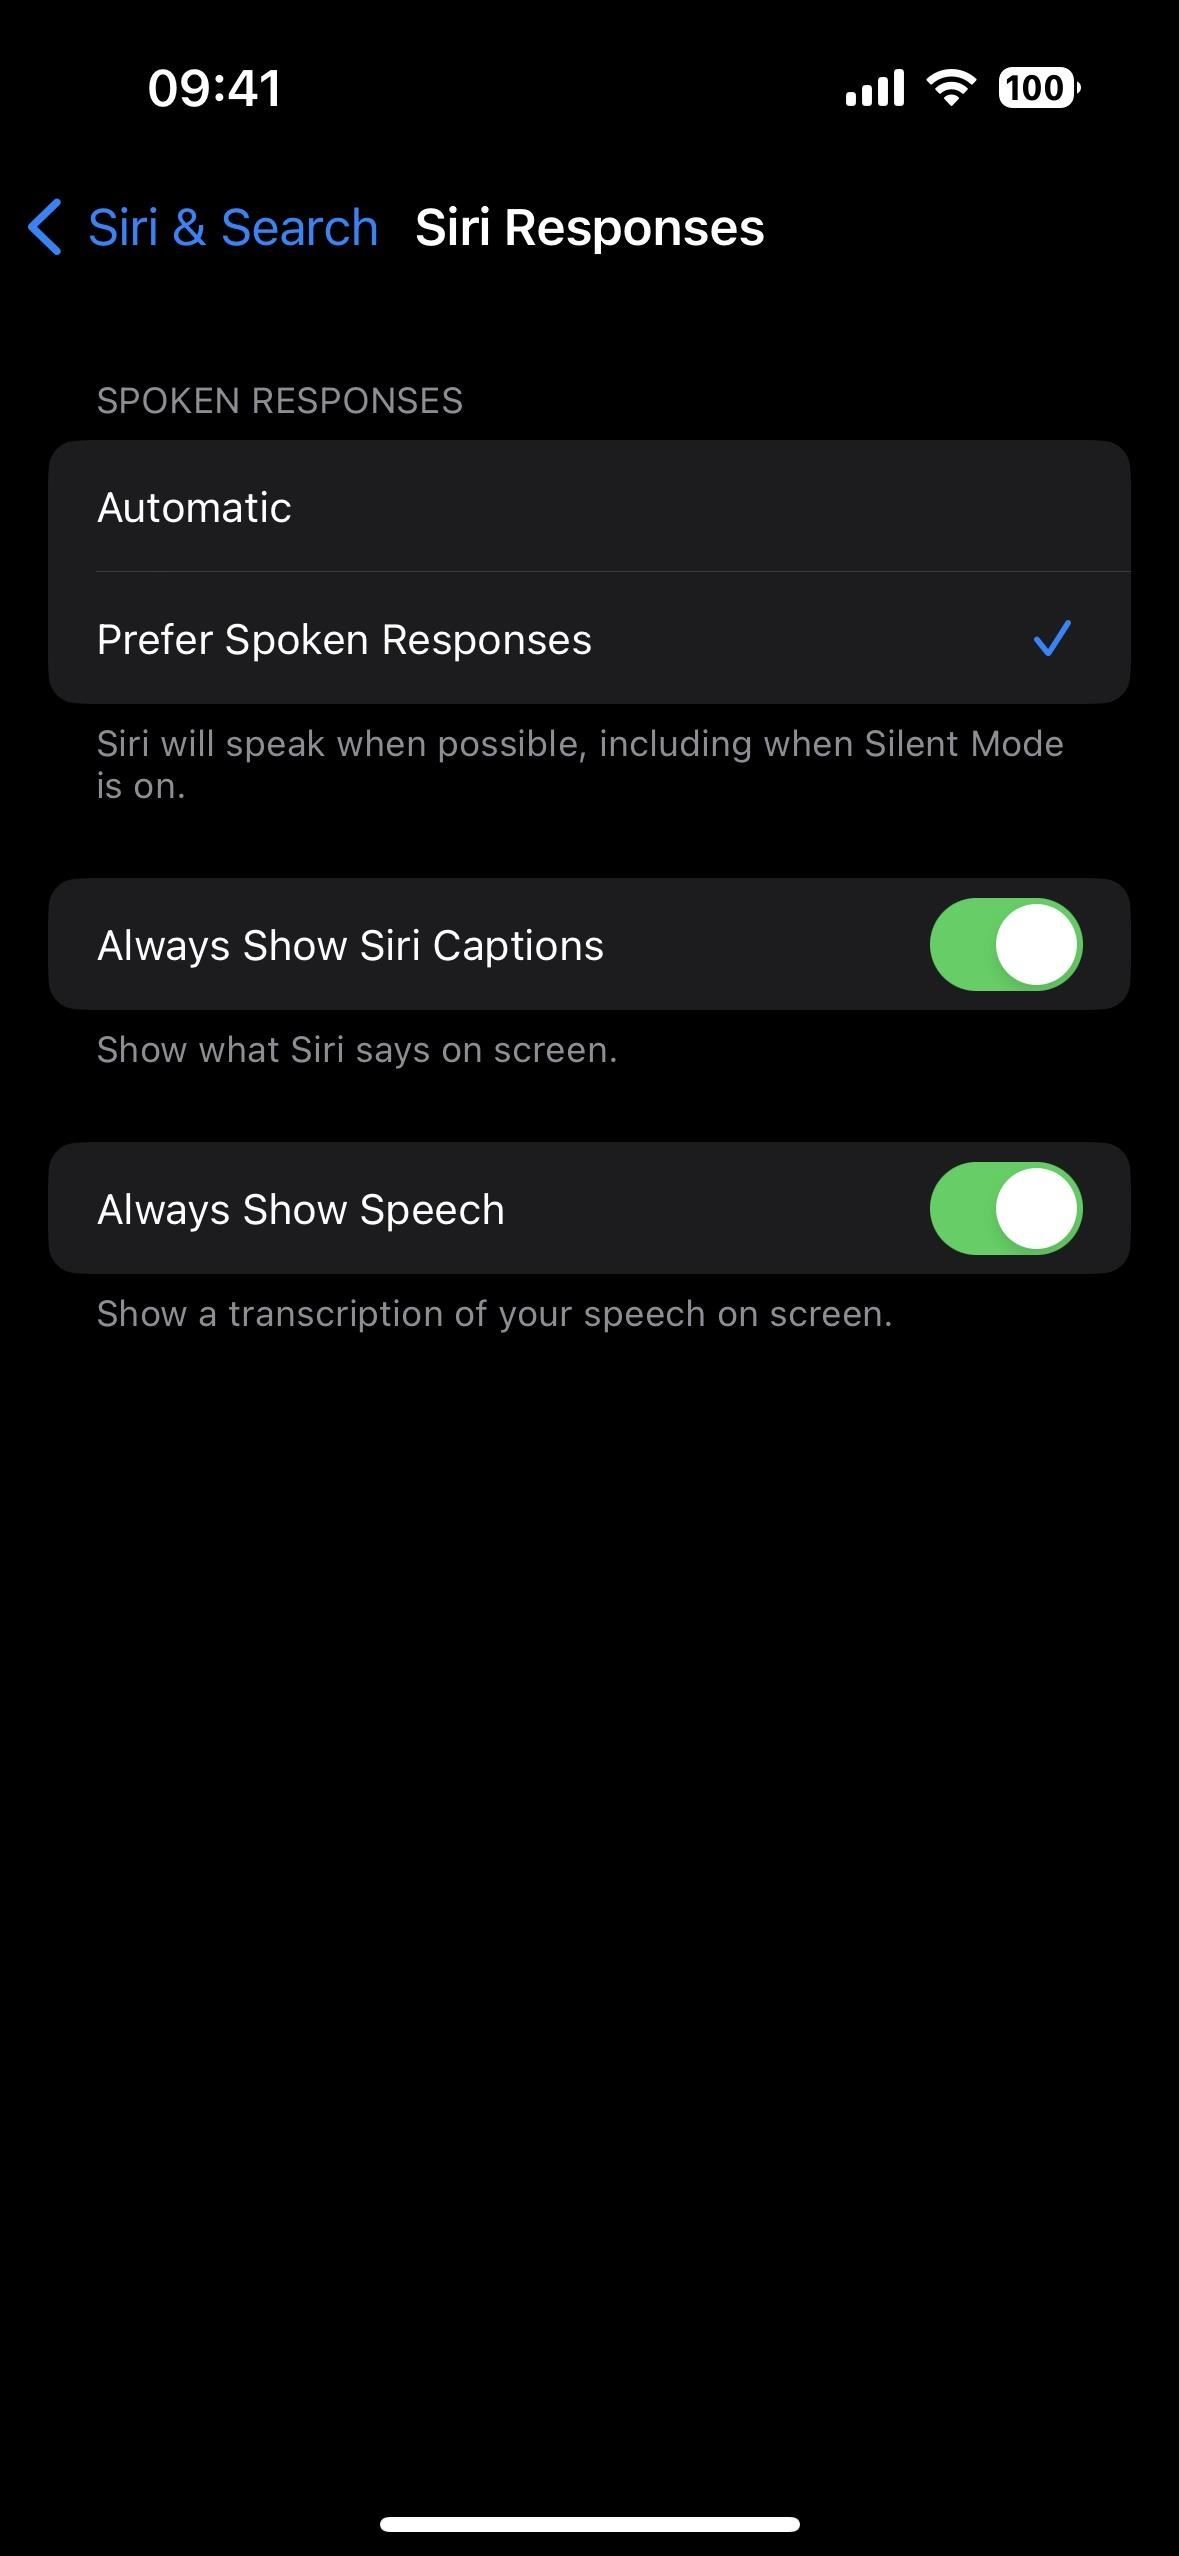 Apple just fixed the Siri voice response issue in iOS 16, giving you more control over audible responses.